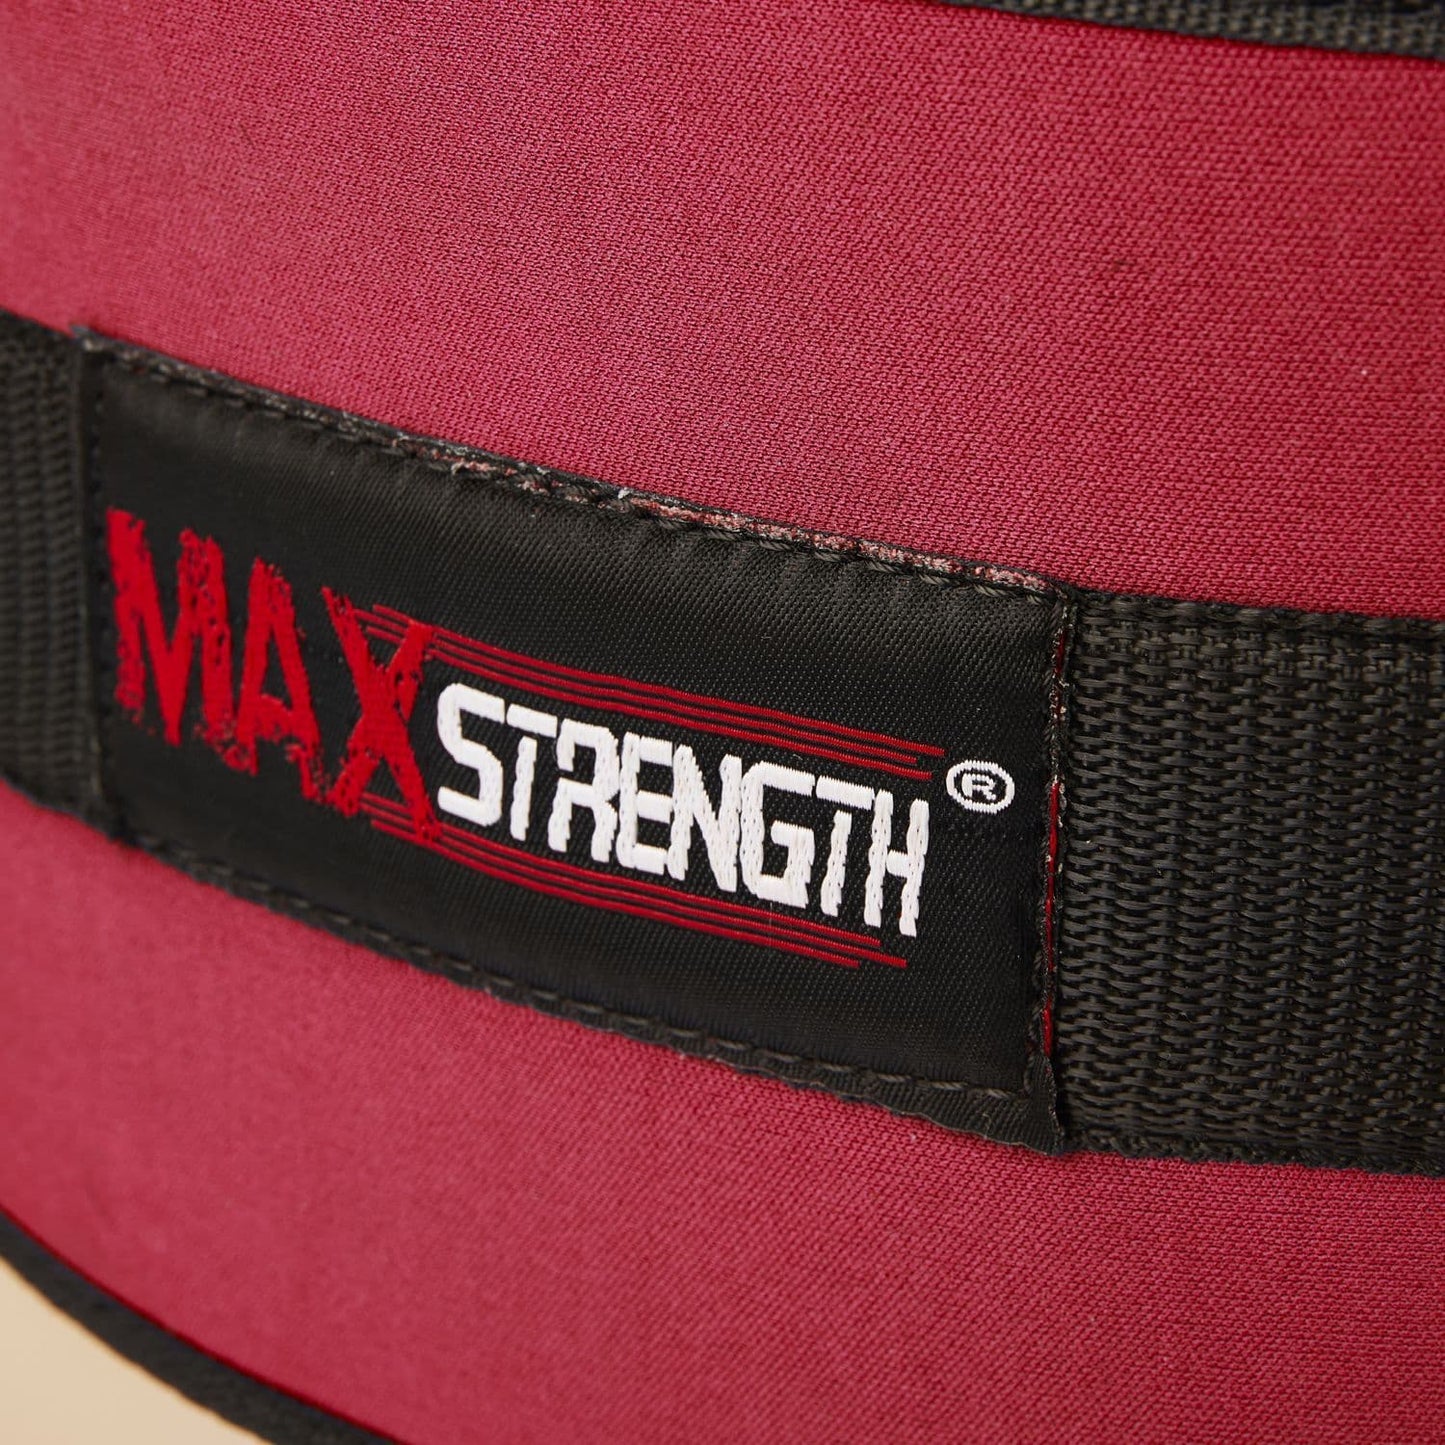 X MAXSTRENGTH Neoprene Weightlifting Back Support Belt Red